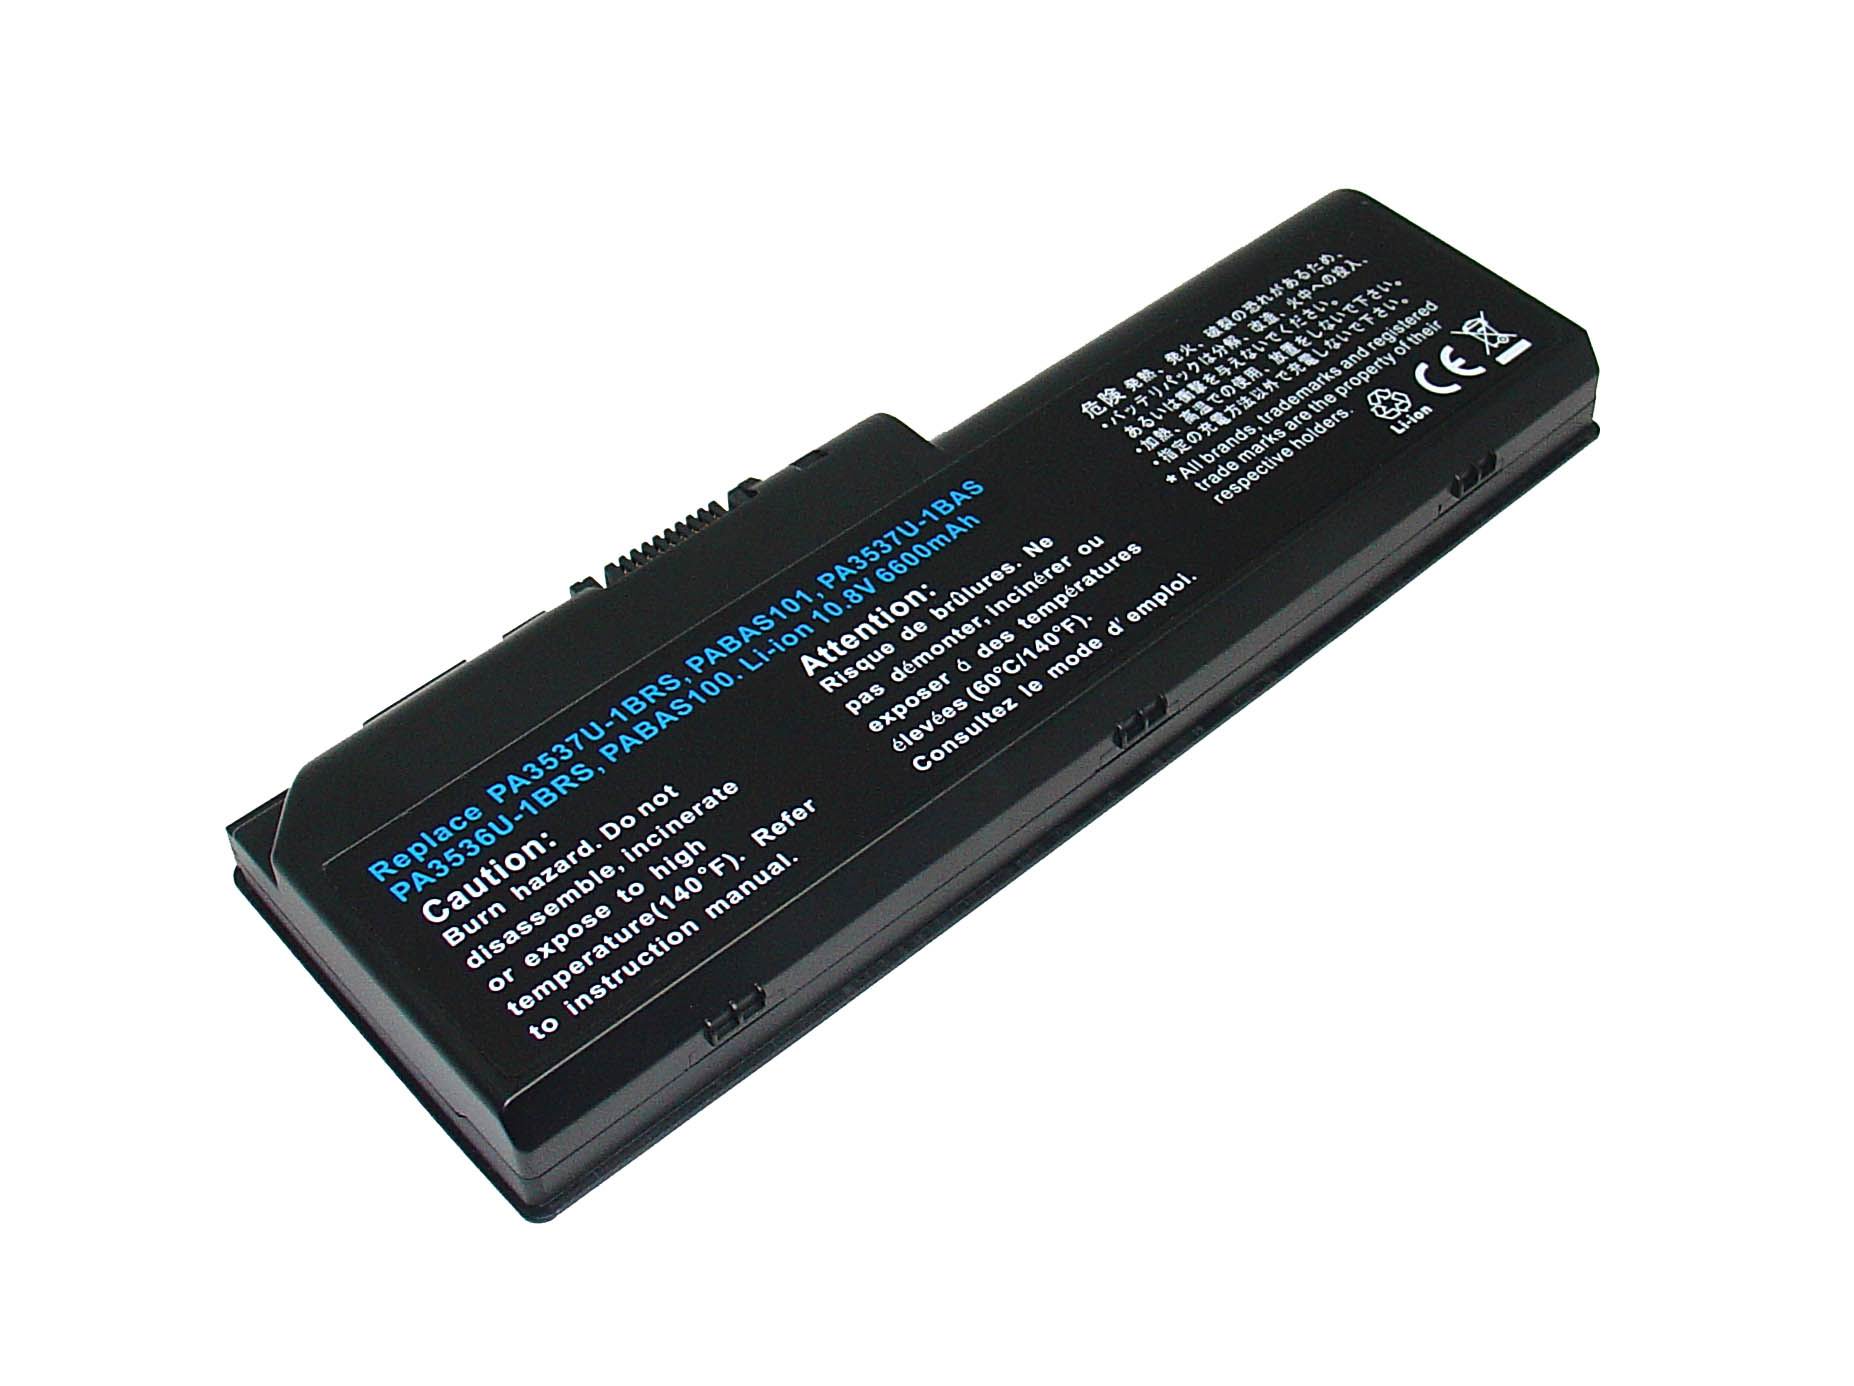 OEM Laptop Battery Replacement for  toshiba Satellite Pro L350 16J